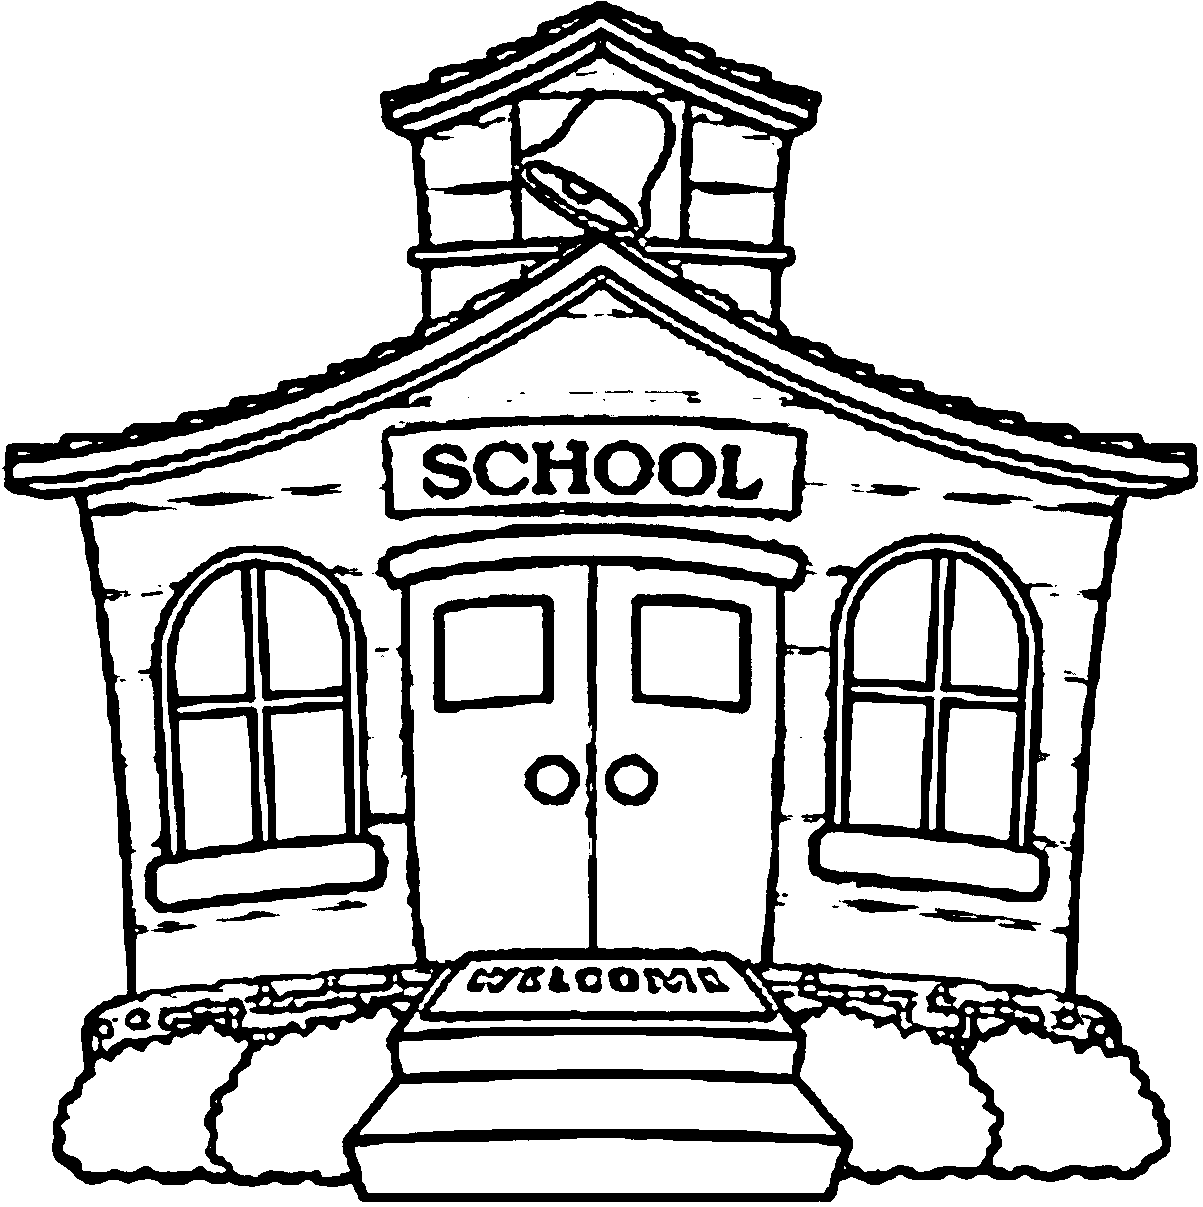 school building coloring pages coloring page of a school building coloring home coloring school coloring pages building 